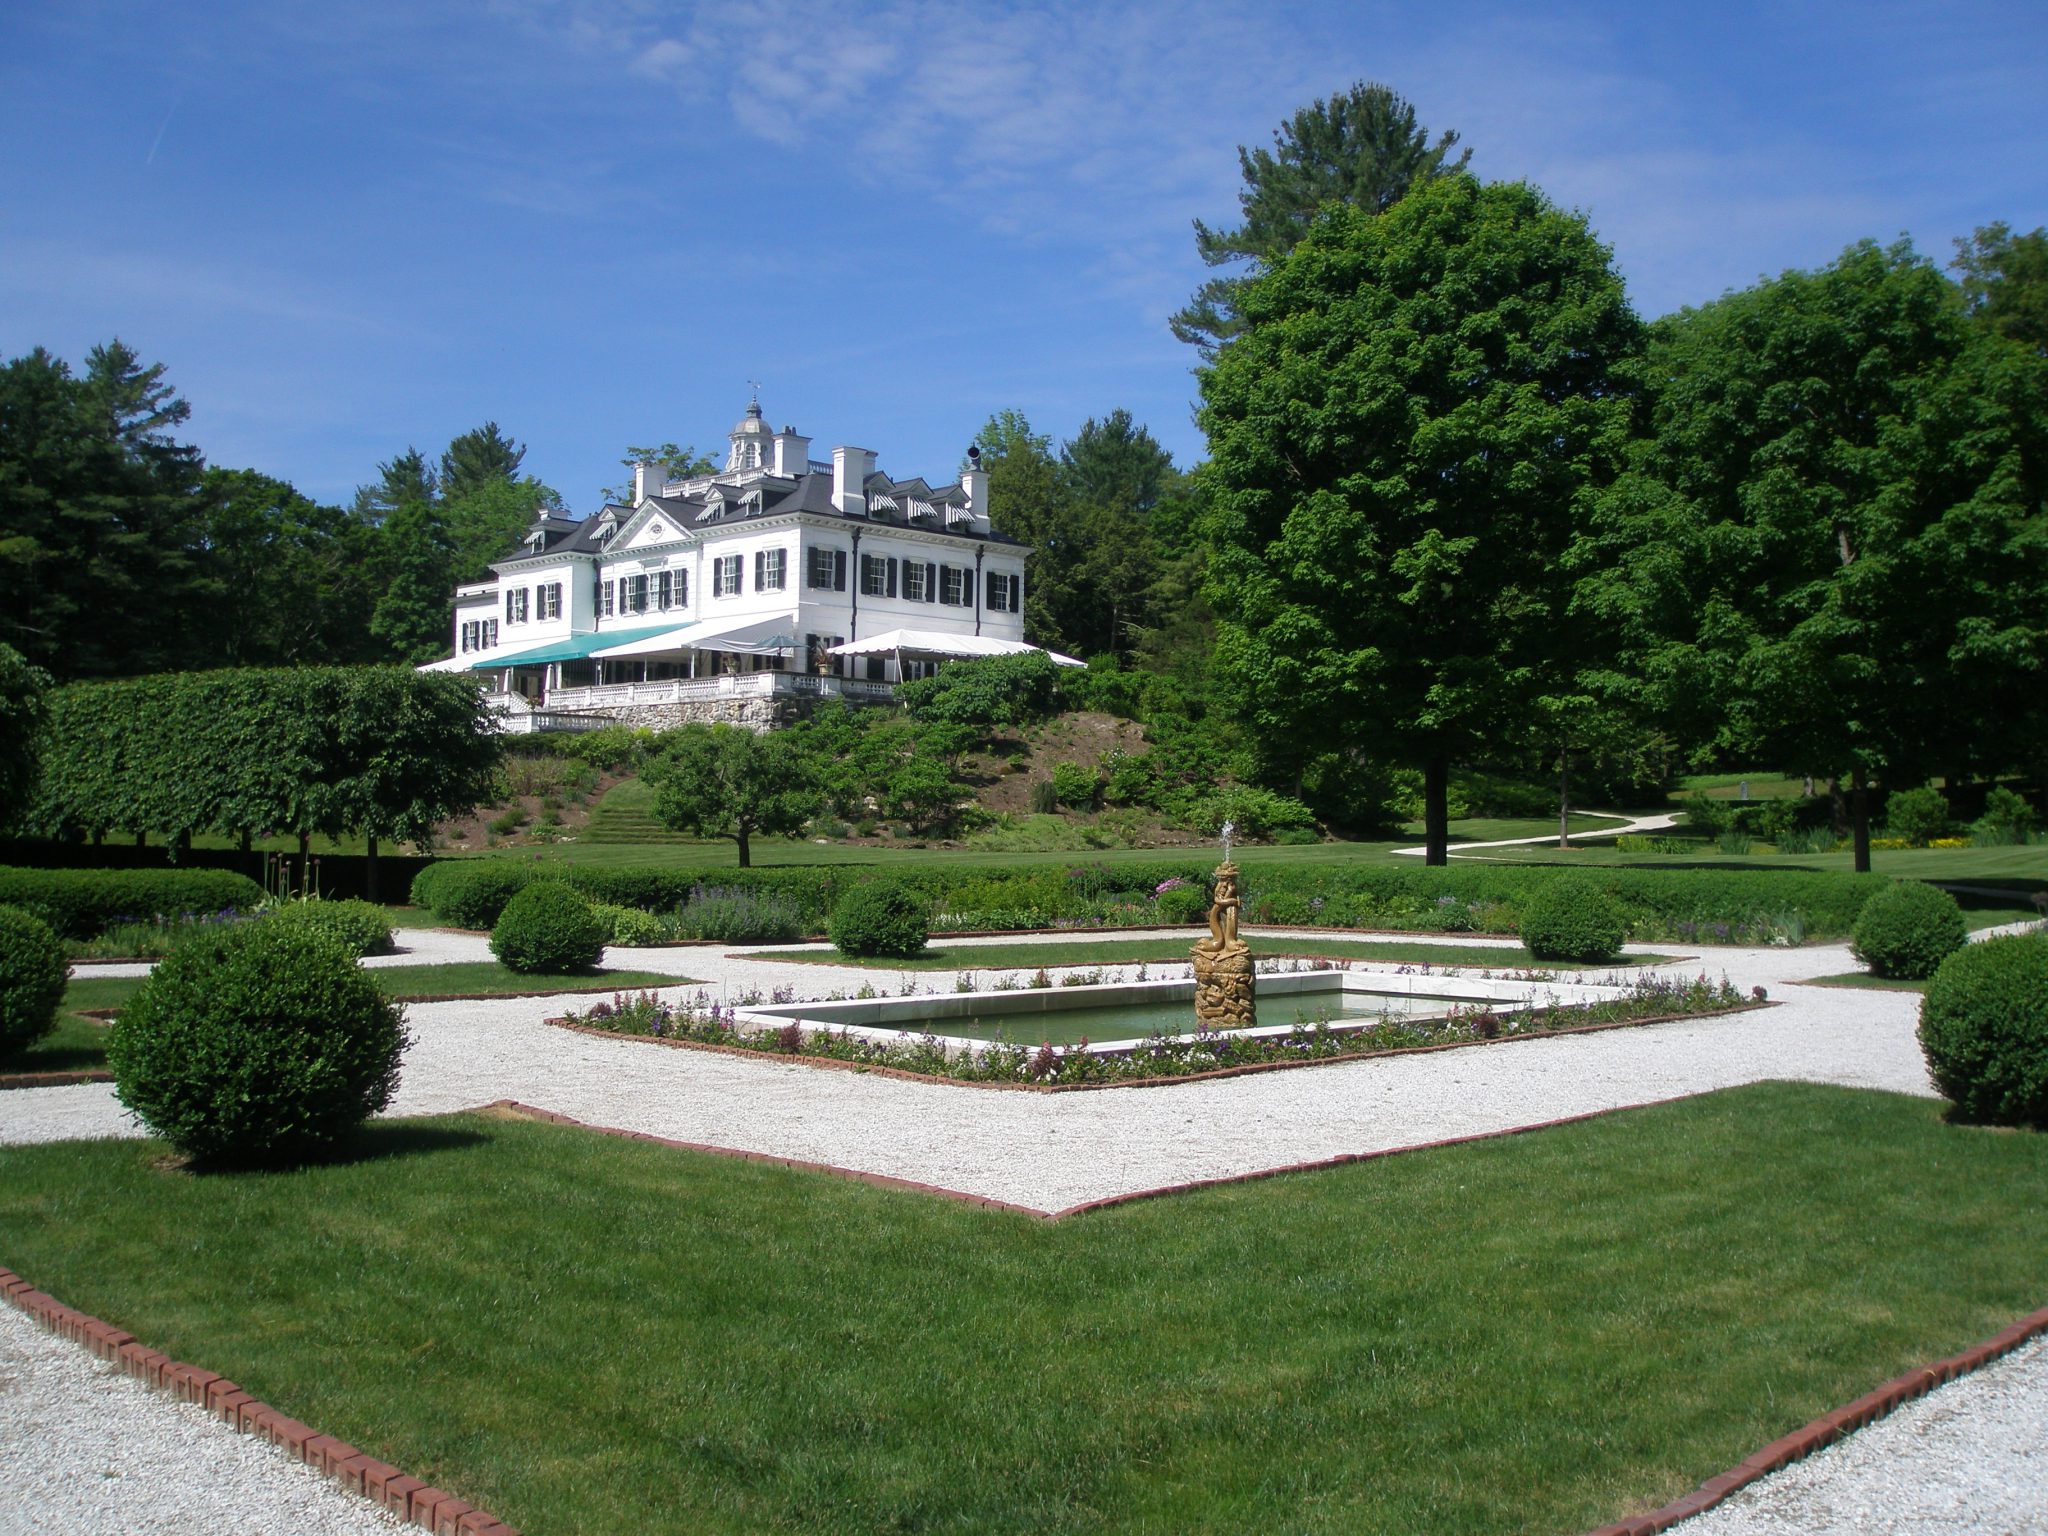 View of the Main House, from the Flower Garden